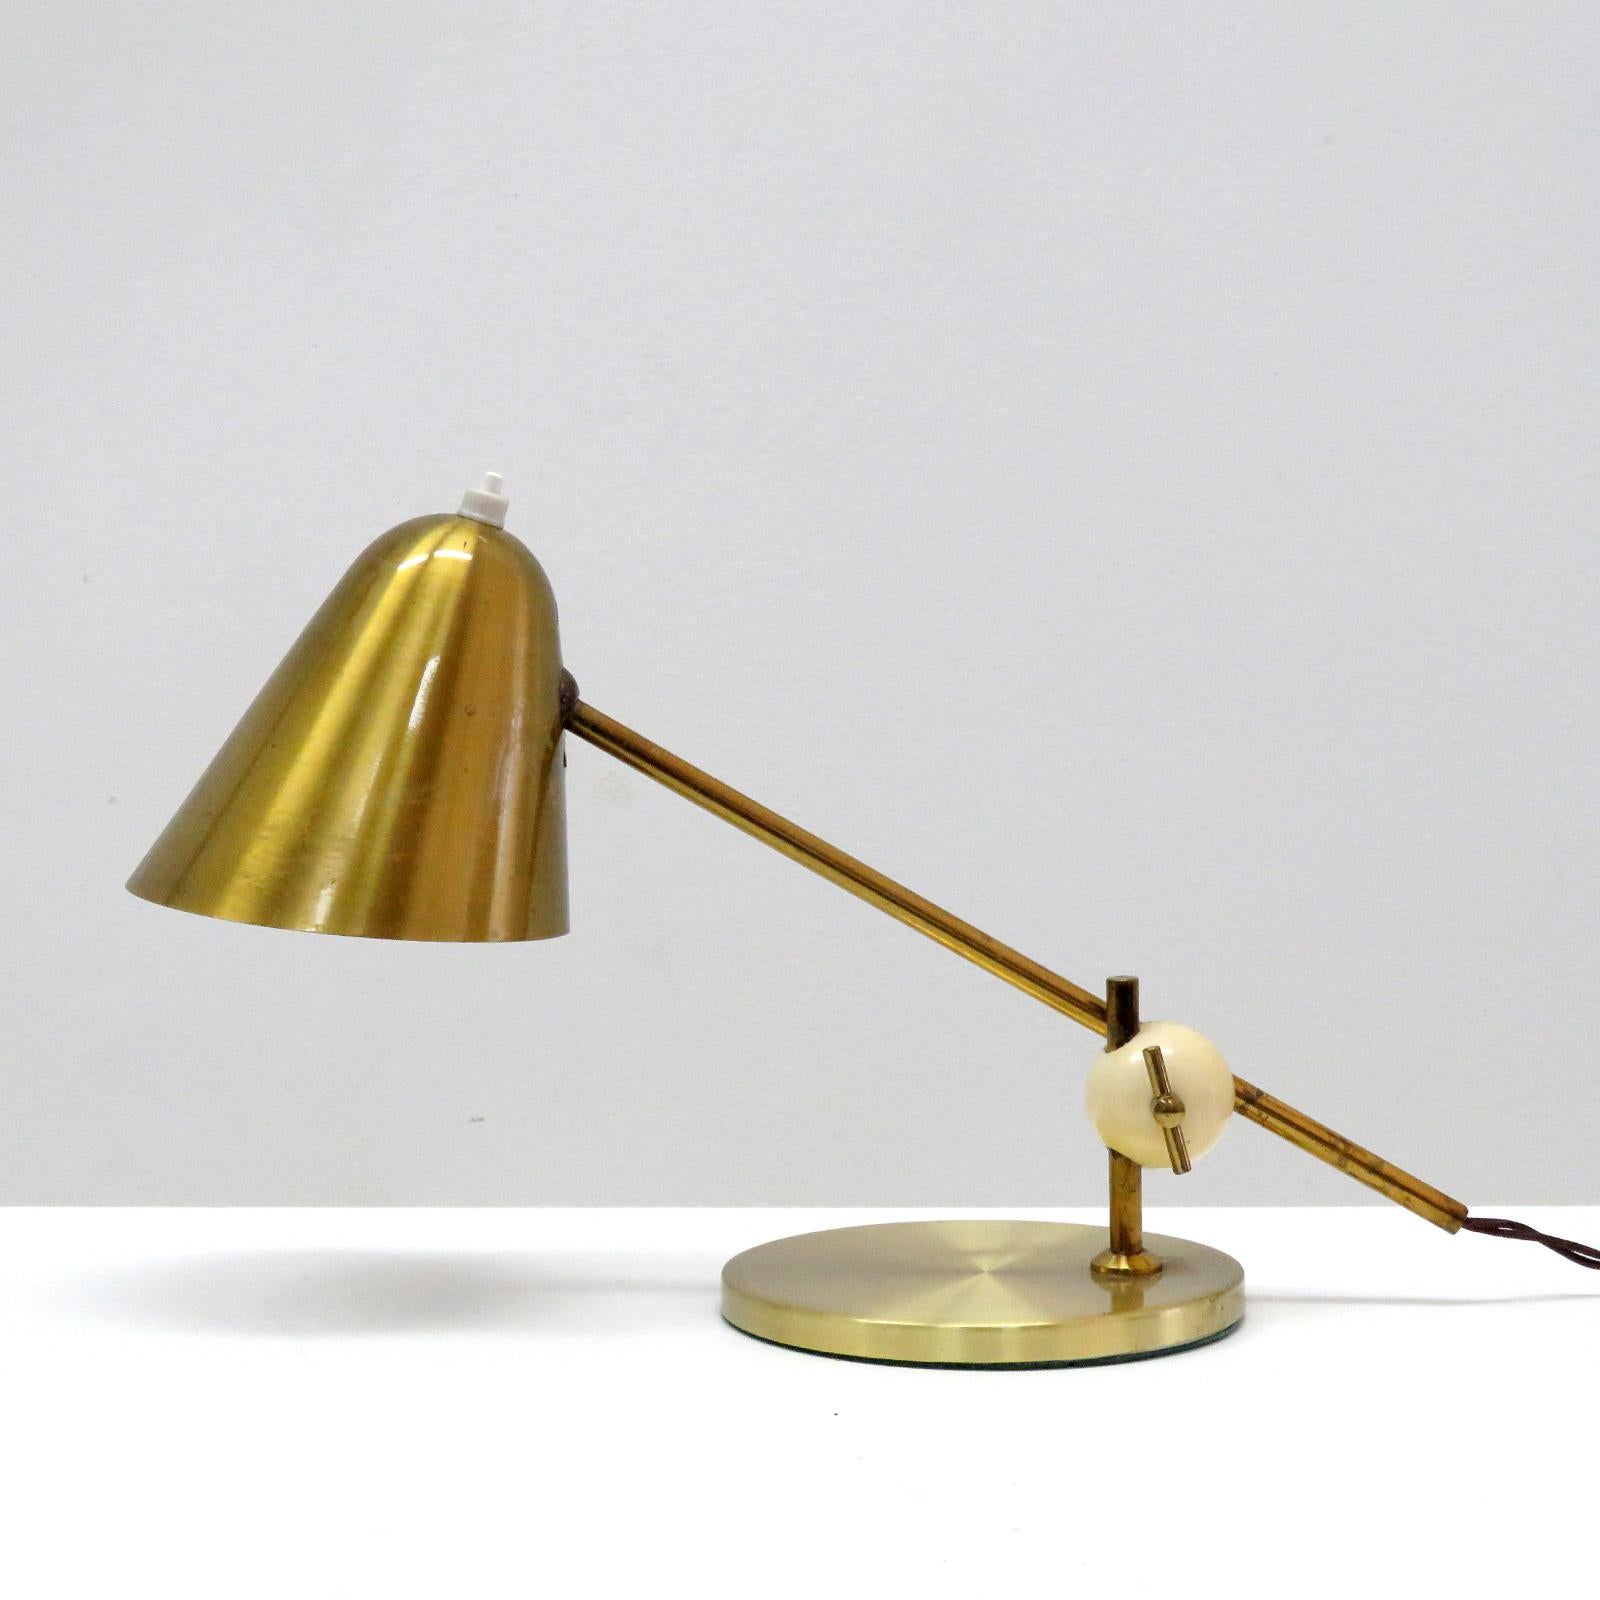 Wonderful brass table lamp by Jacques Biny with wonderful patina, adjustable at the hood and the white bakelite ball joint, wired for US standards, one E12 socket per fixture, max. wattage 60w, bulb provided as a onetime courtesy.